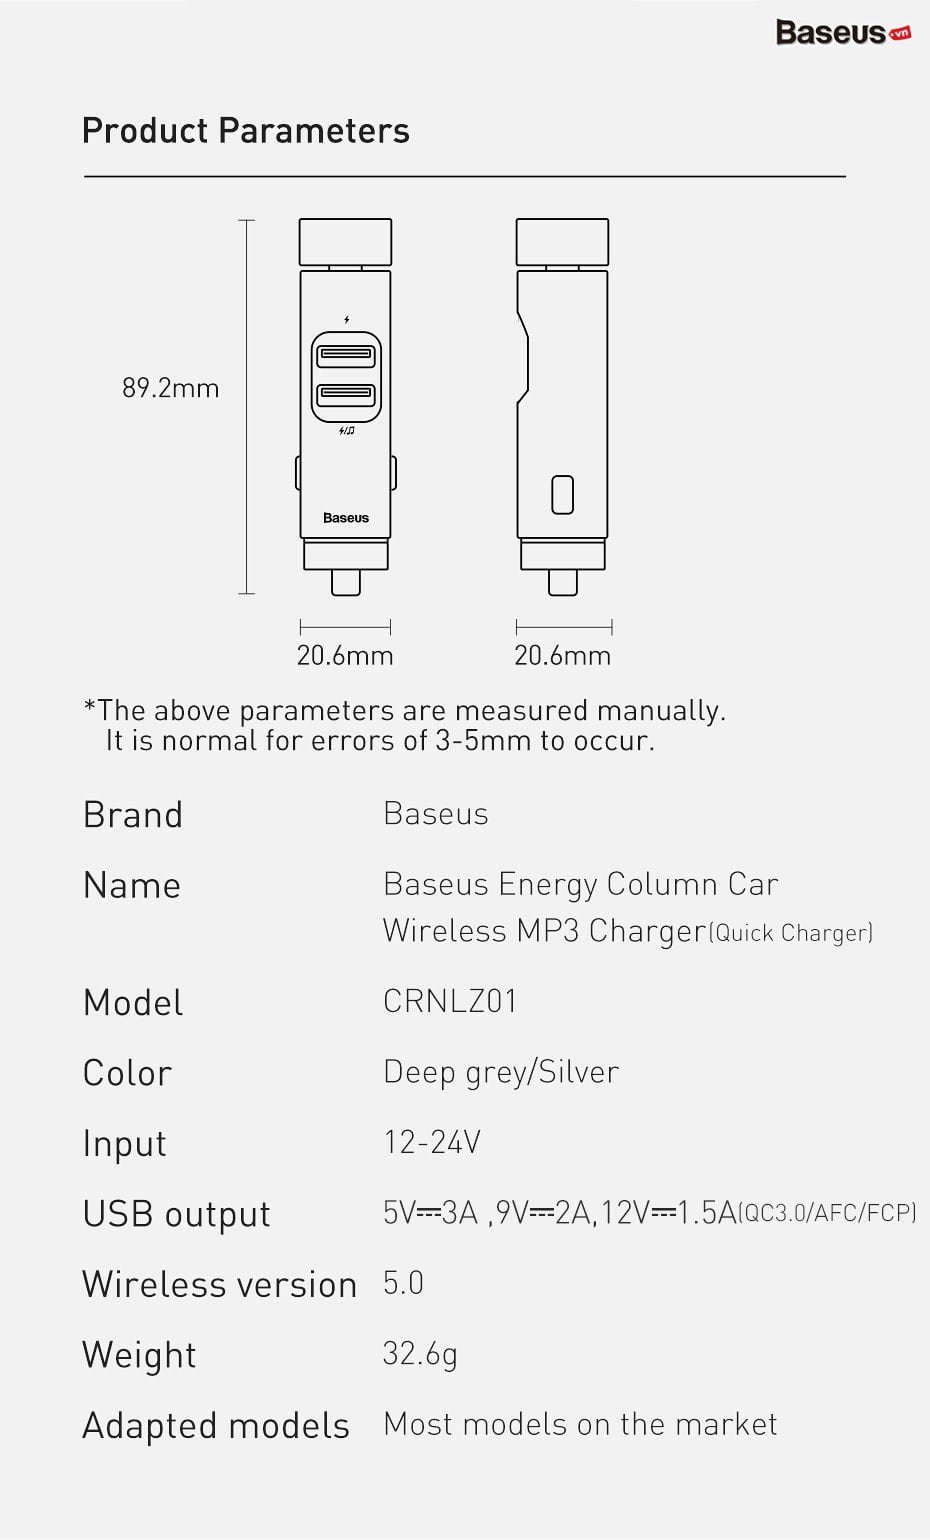 energy column car wireless mp3 charger pps quick charger english 14 73f5c978f2f5469a8a3a529f12e6843f